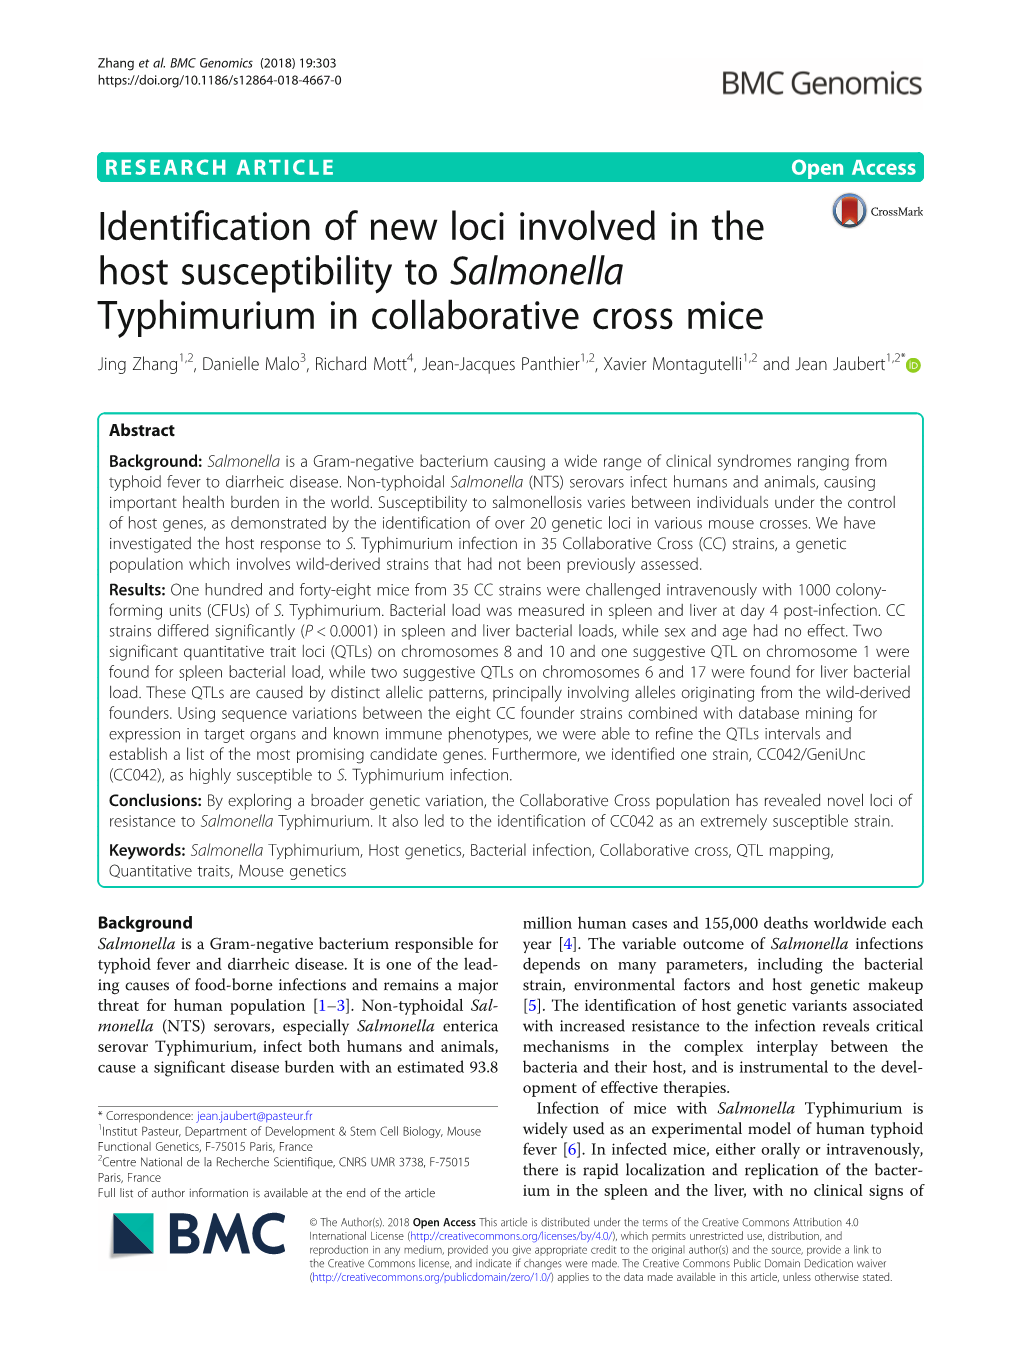 Identification of New Loci Involved in the Host